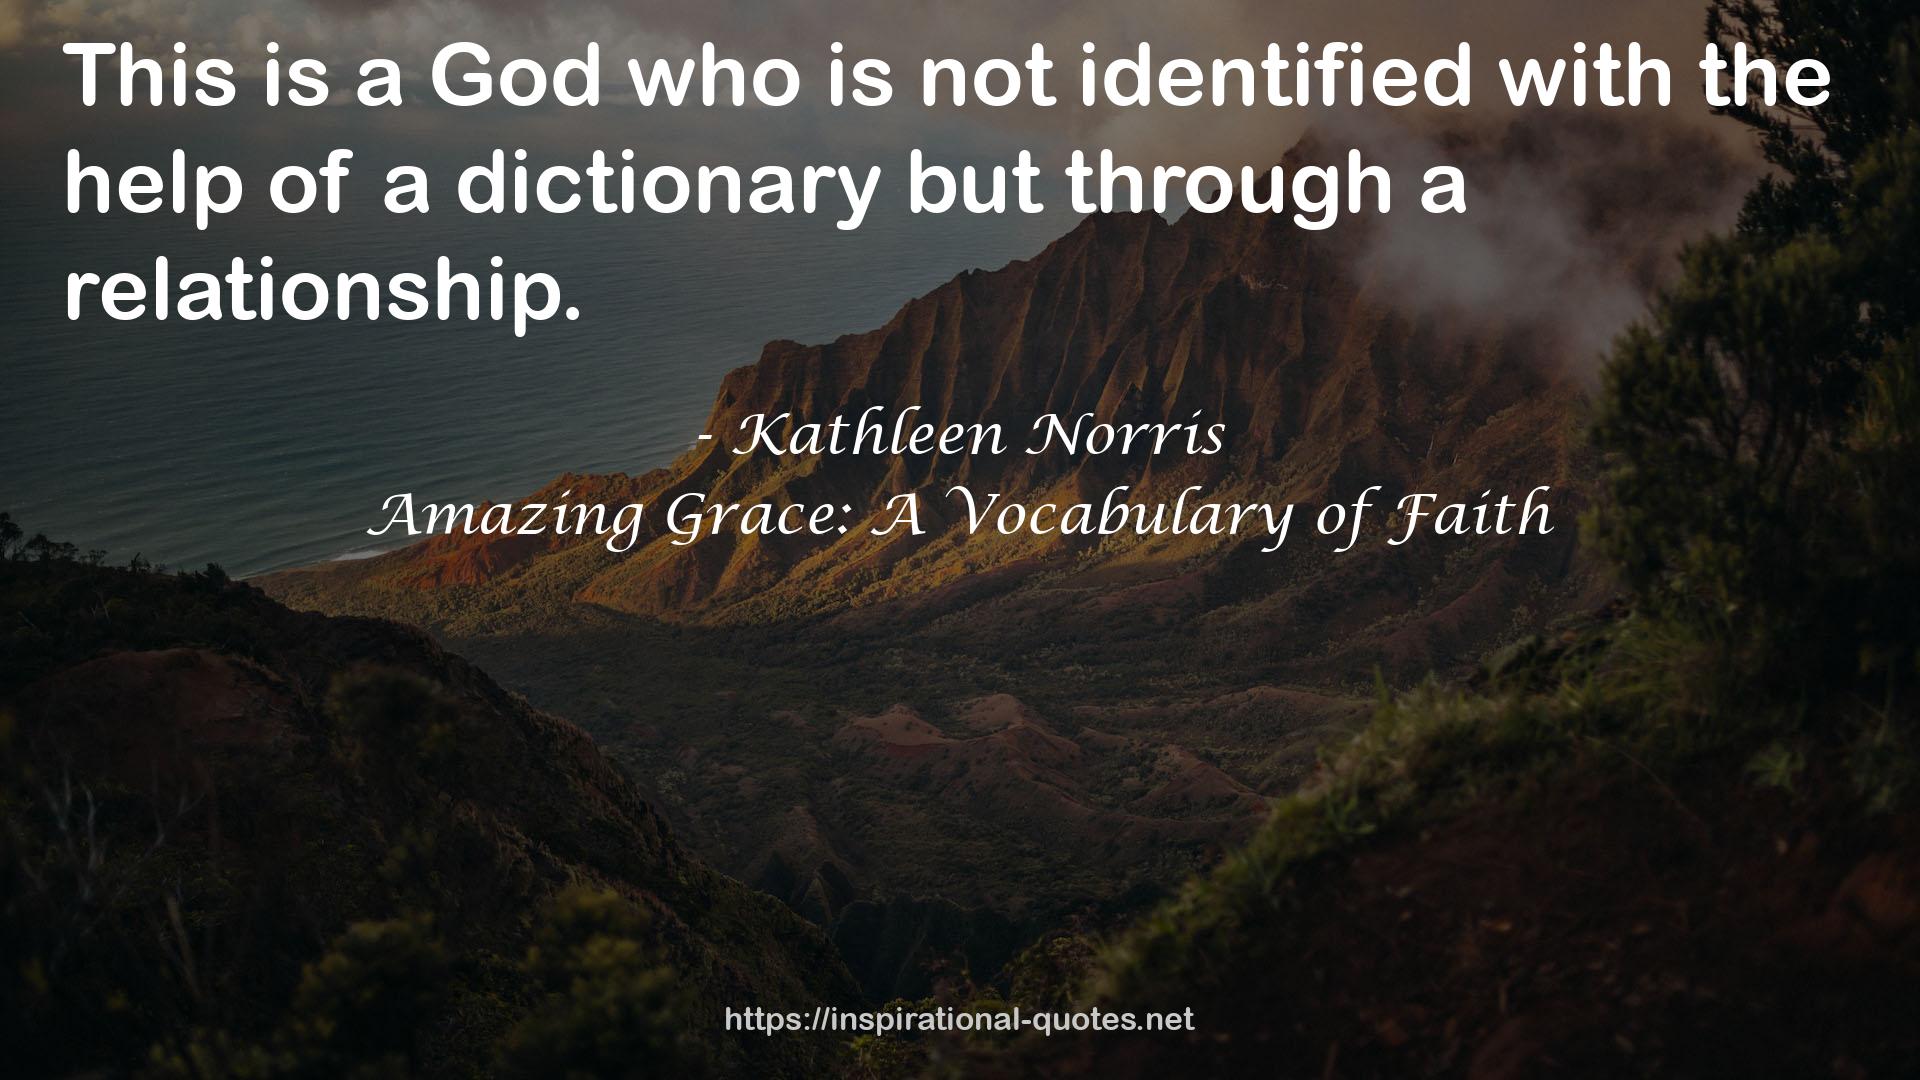 Amazing Grace: A Vocabulary of Faith QUOTES